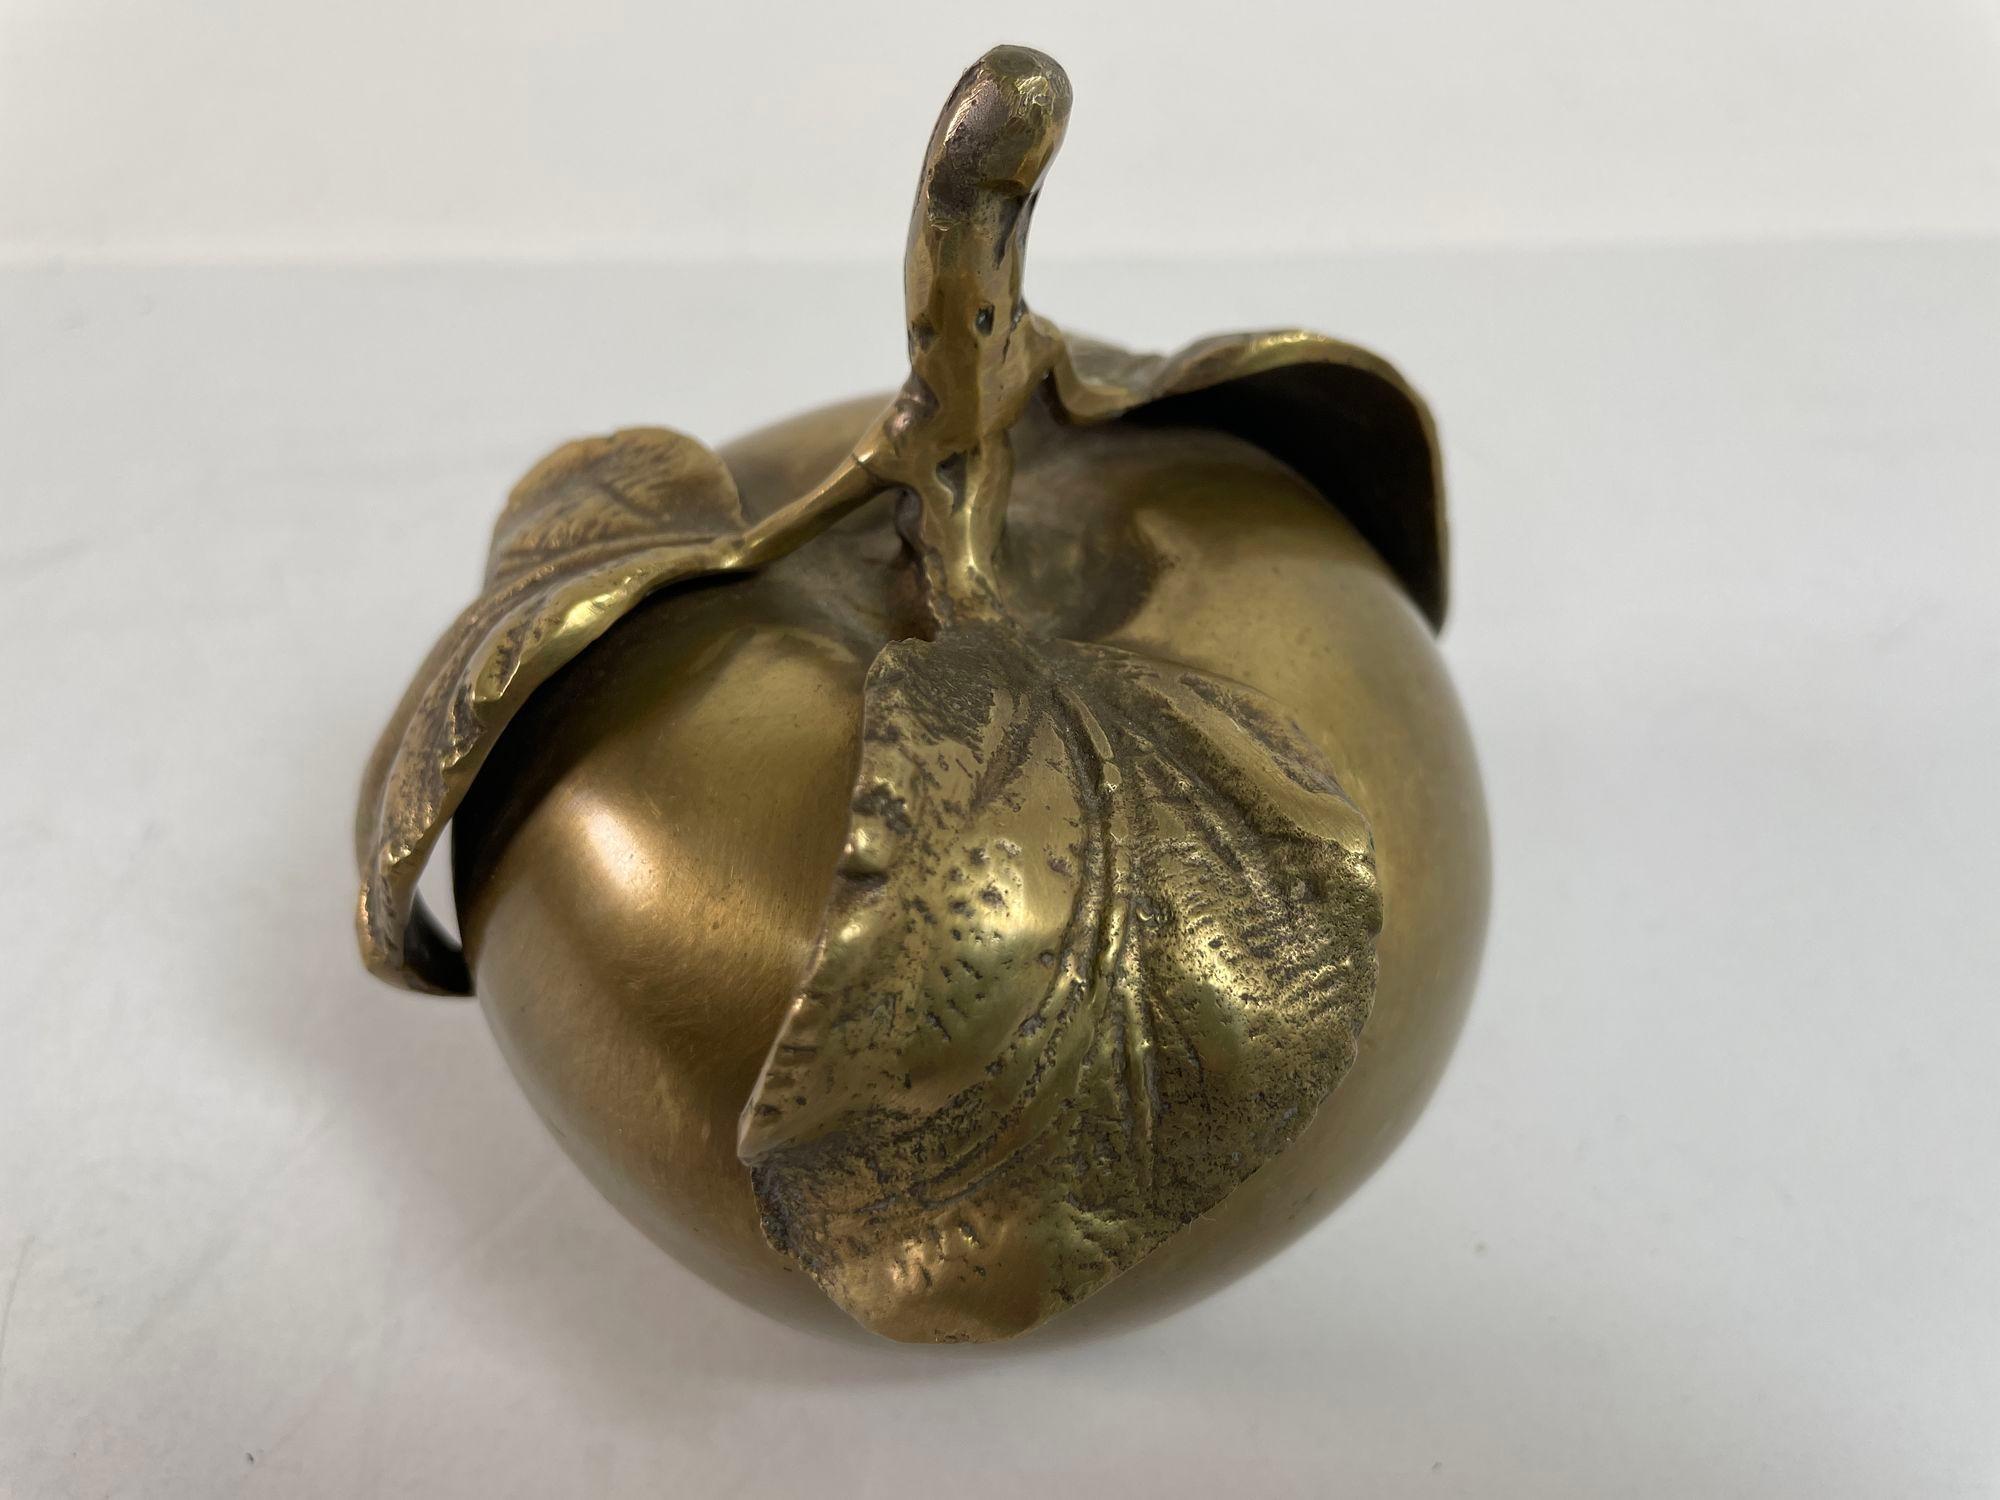 Vintage Brass Apple Sculpture Paperweight For Sale 3